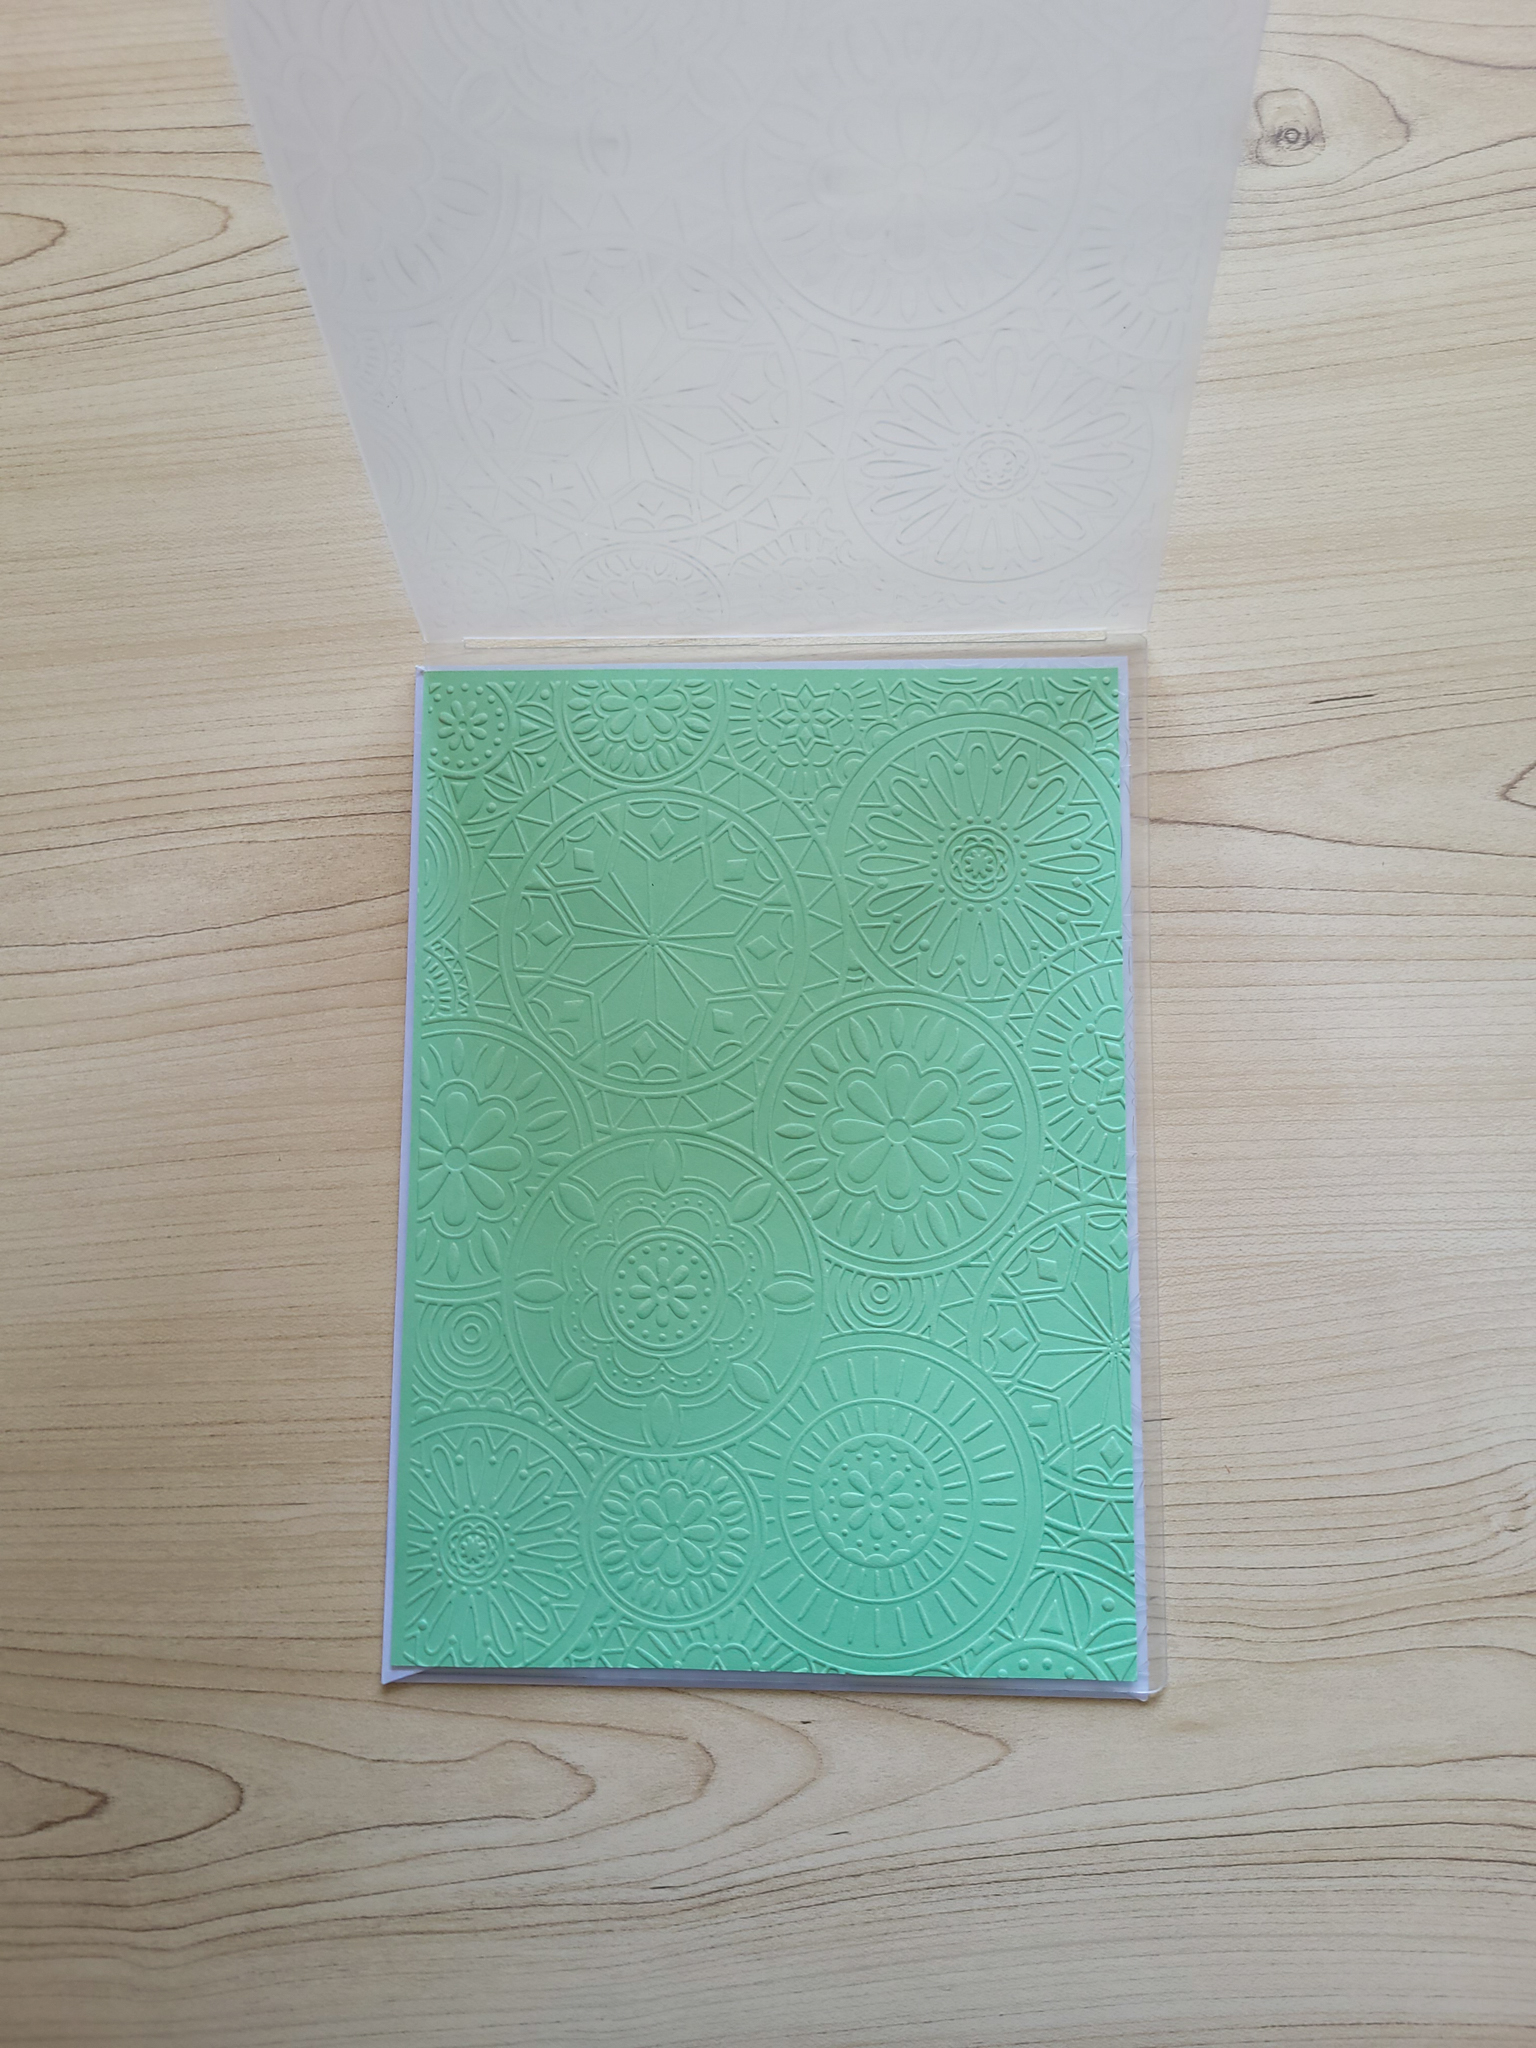 How to add some flair to your envelope’s. – Craftyroseanne